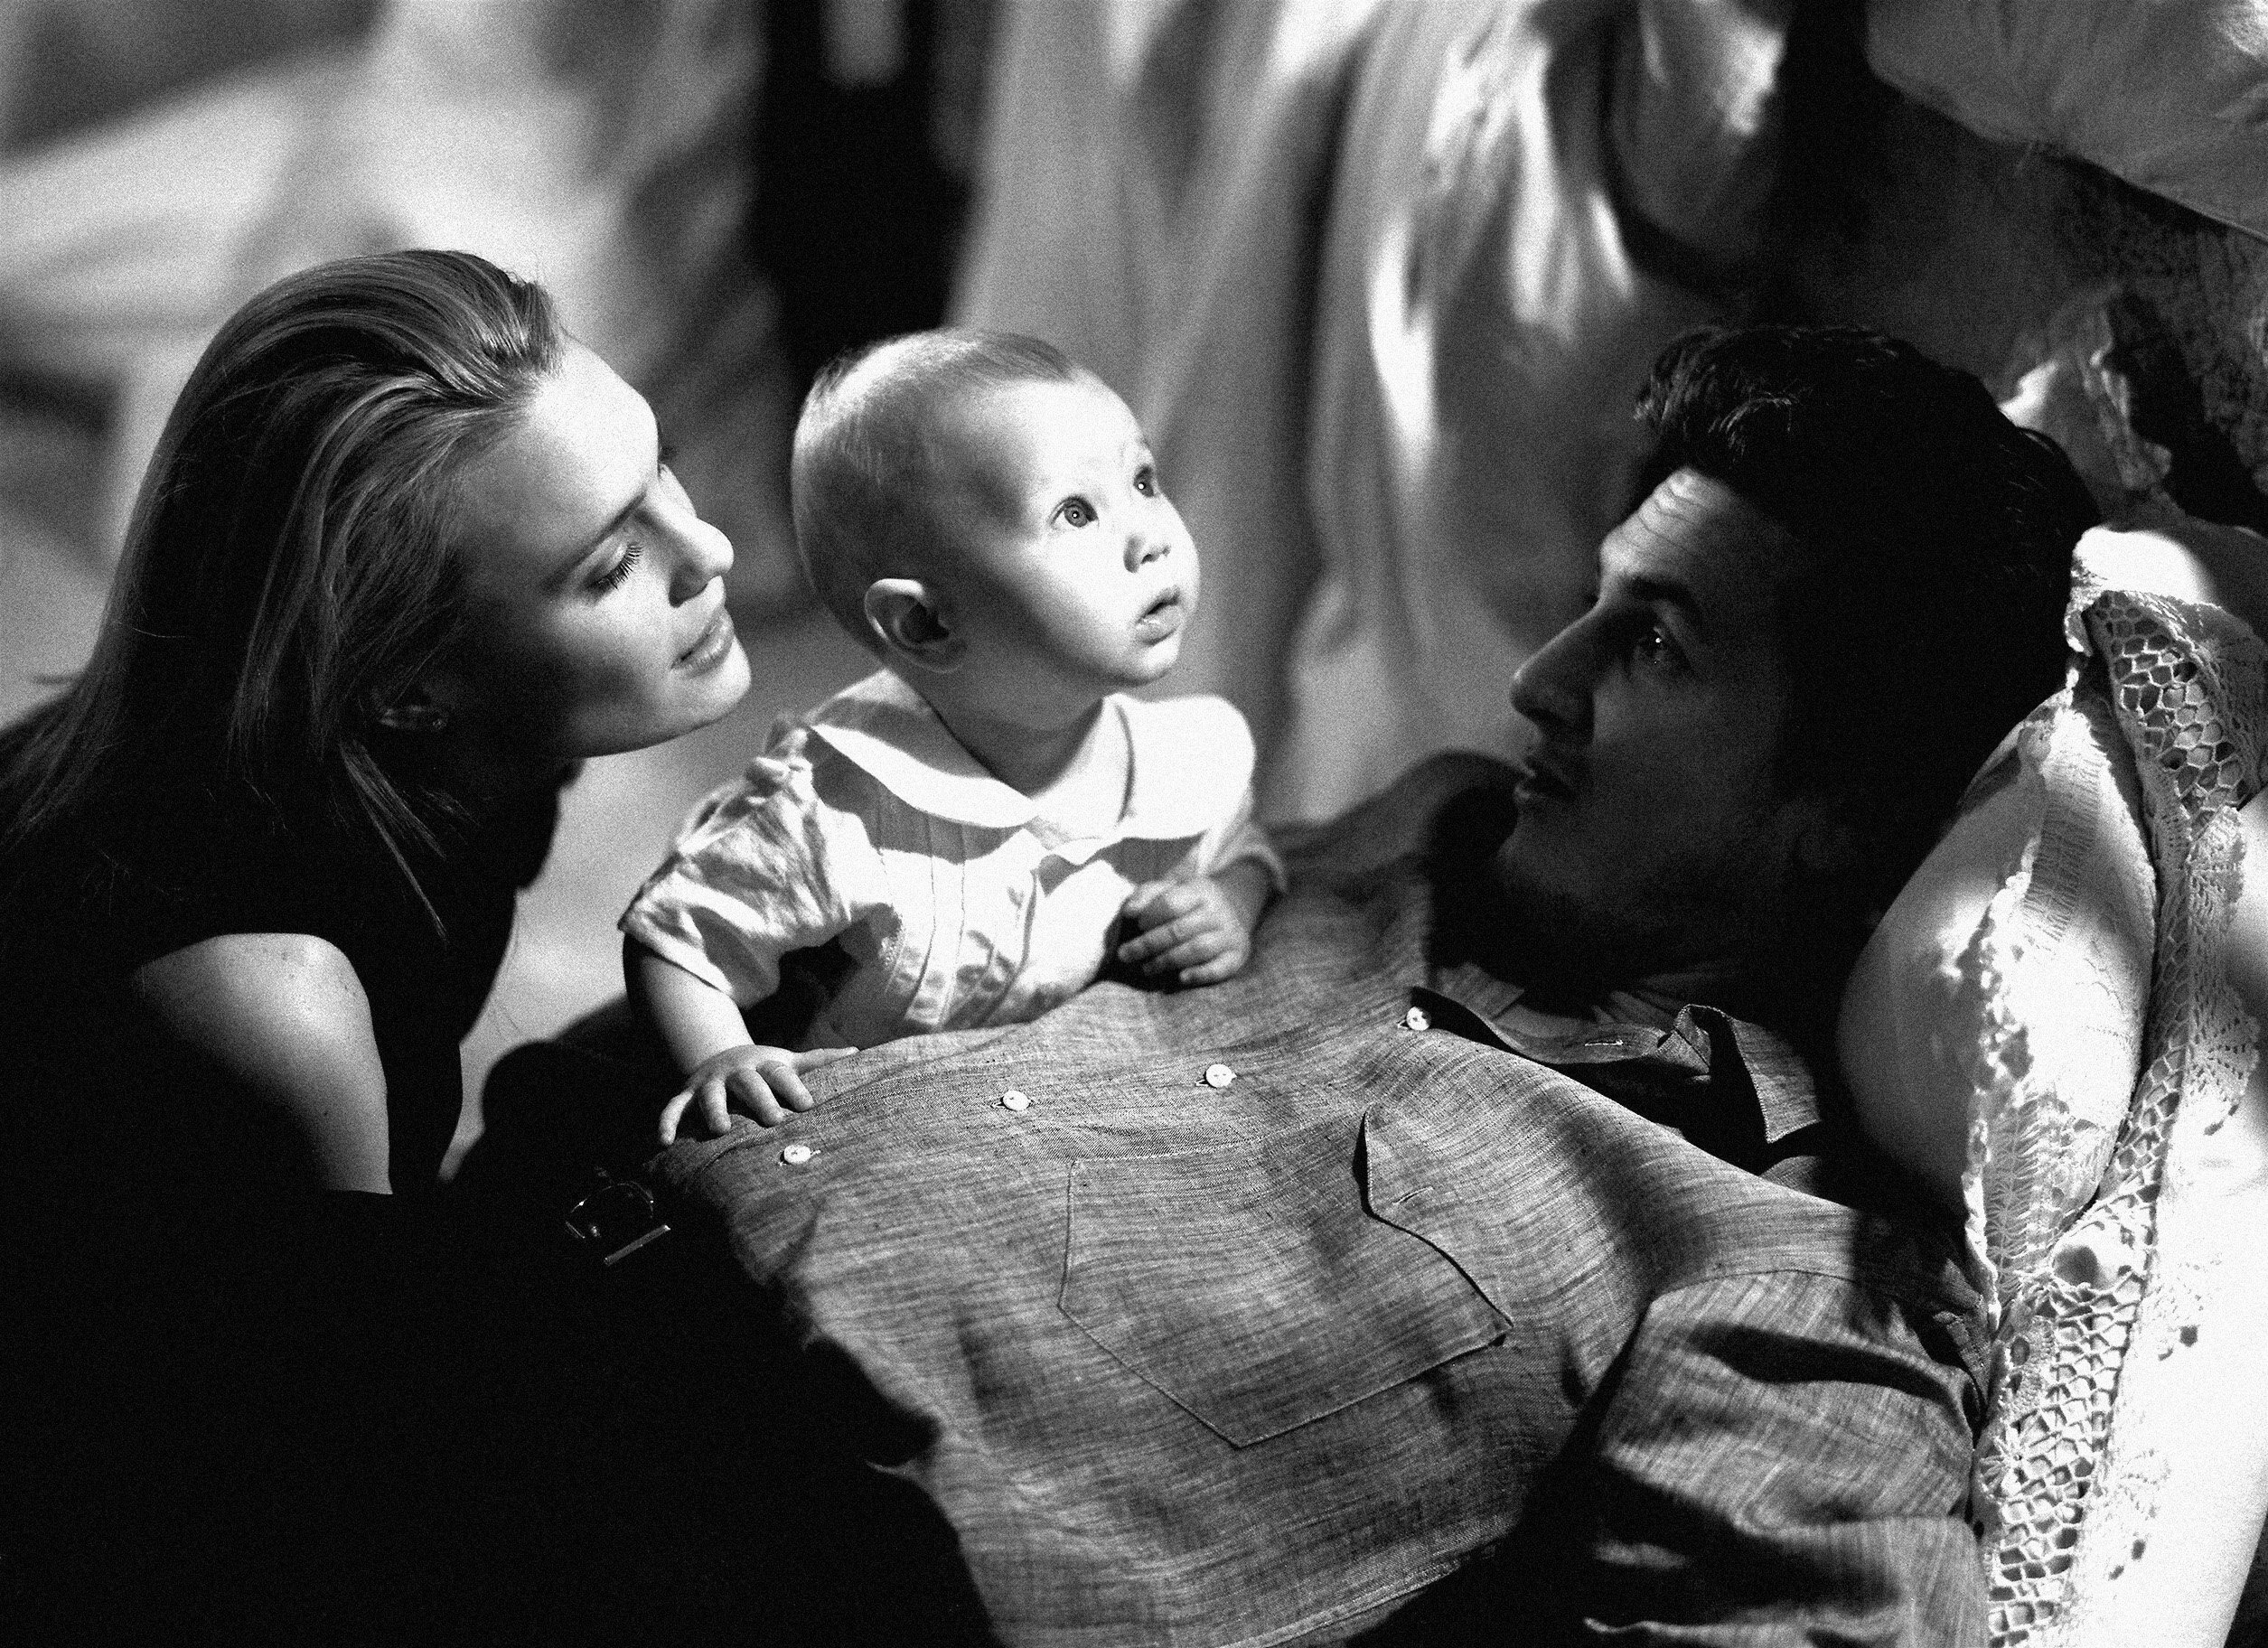 Sean Penn and his girlfriend Robin Wright with their baby daughter Dylan at their residence on January 1, 1991 in Malibu, California